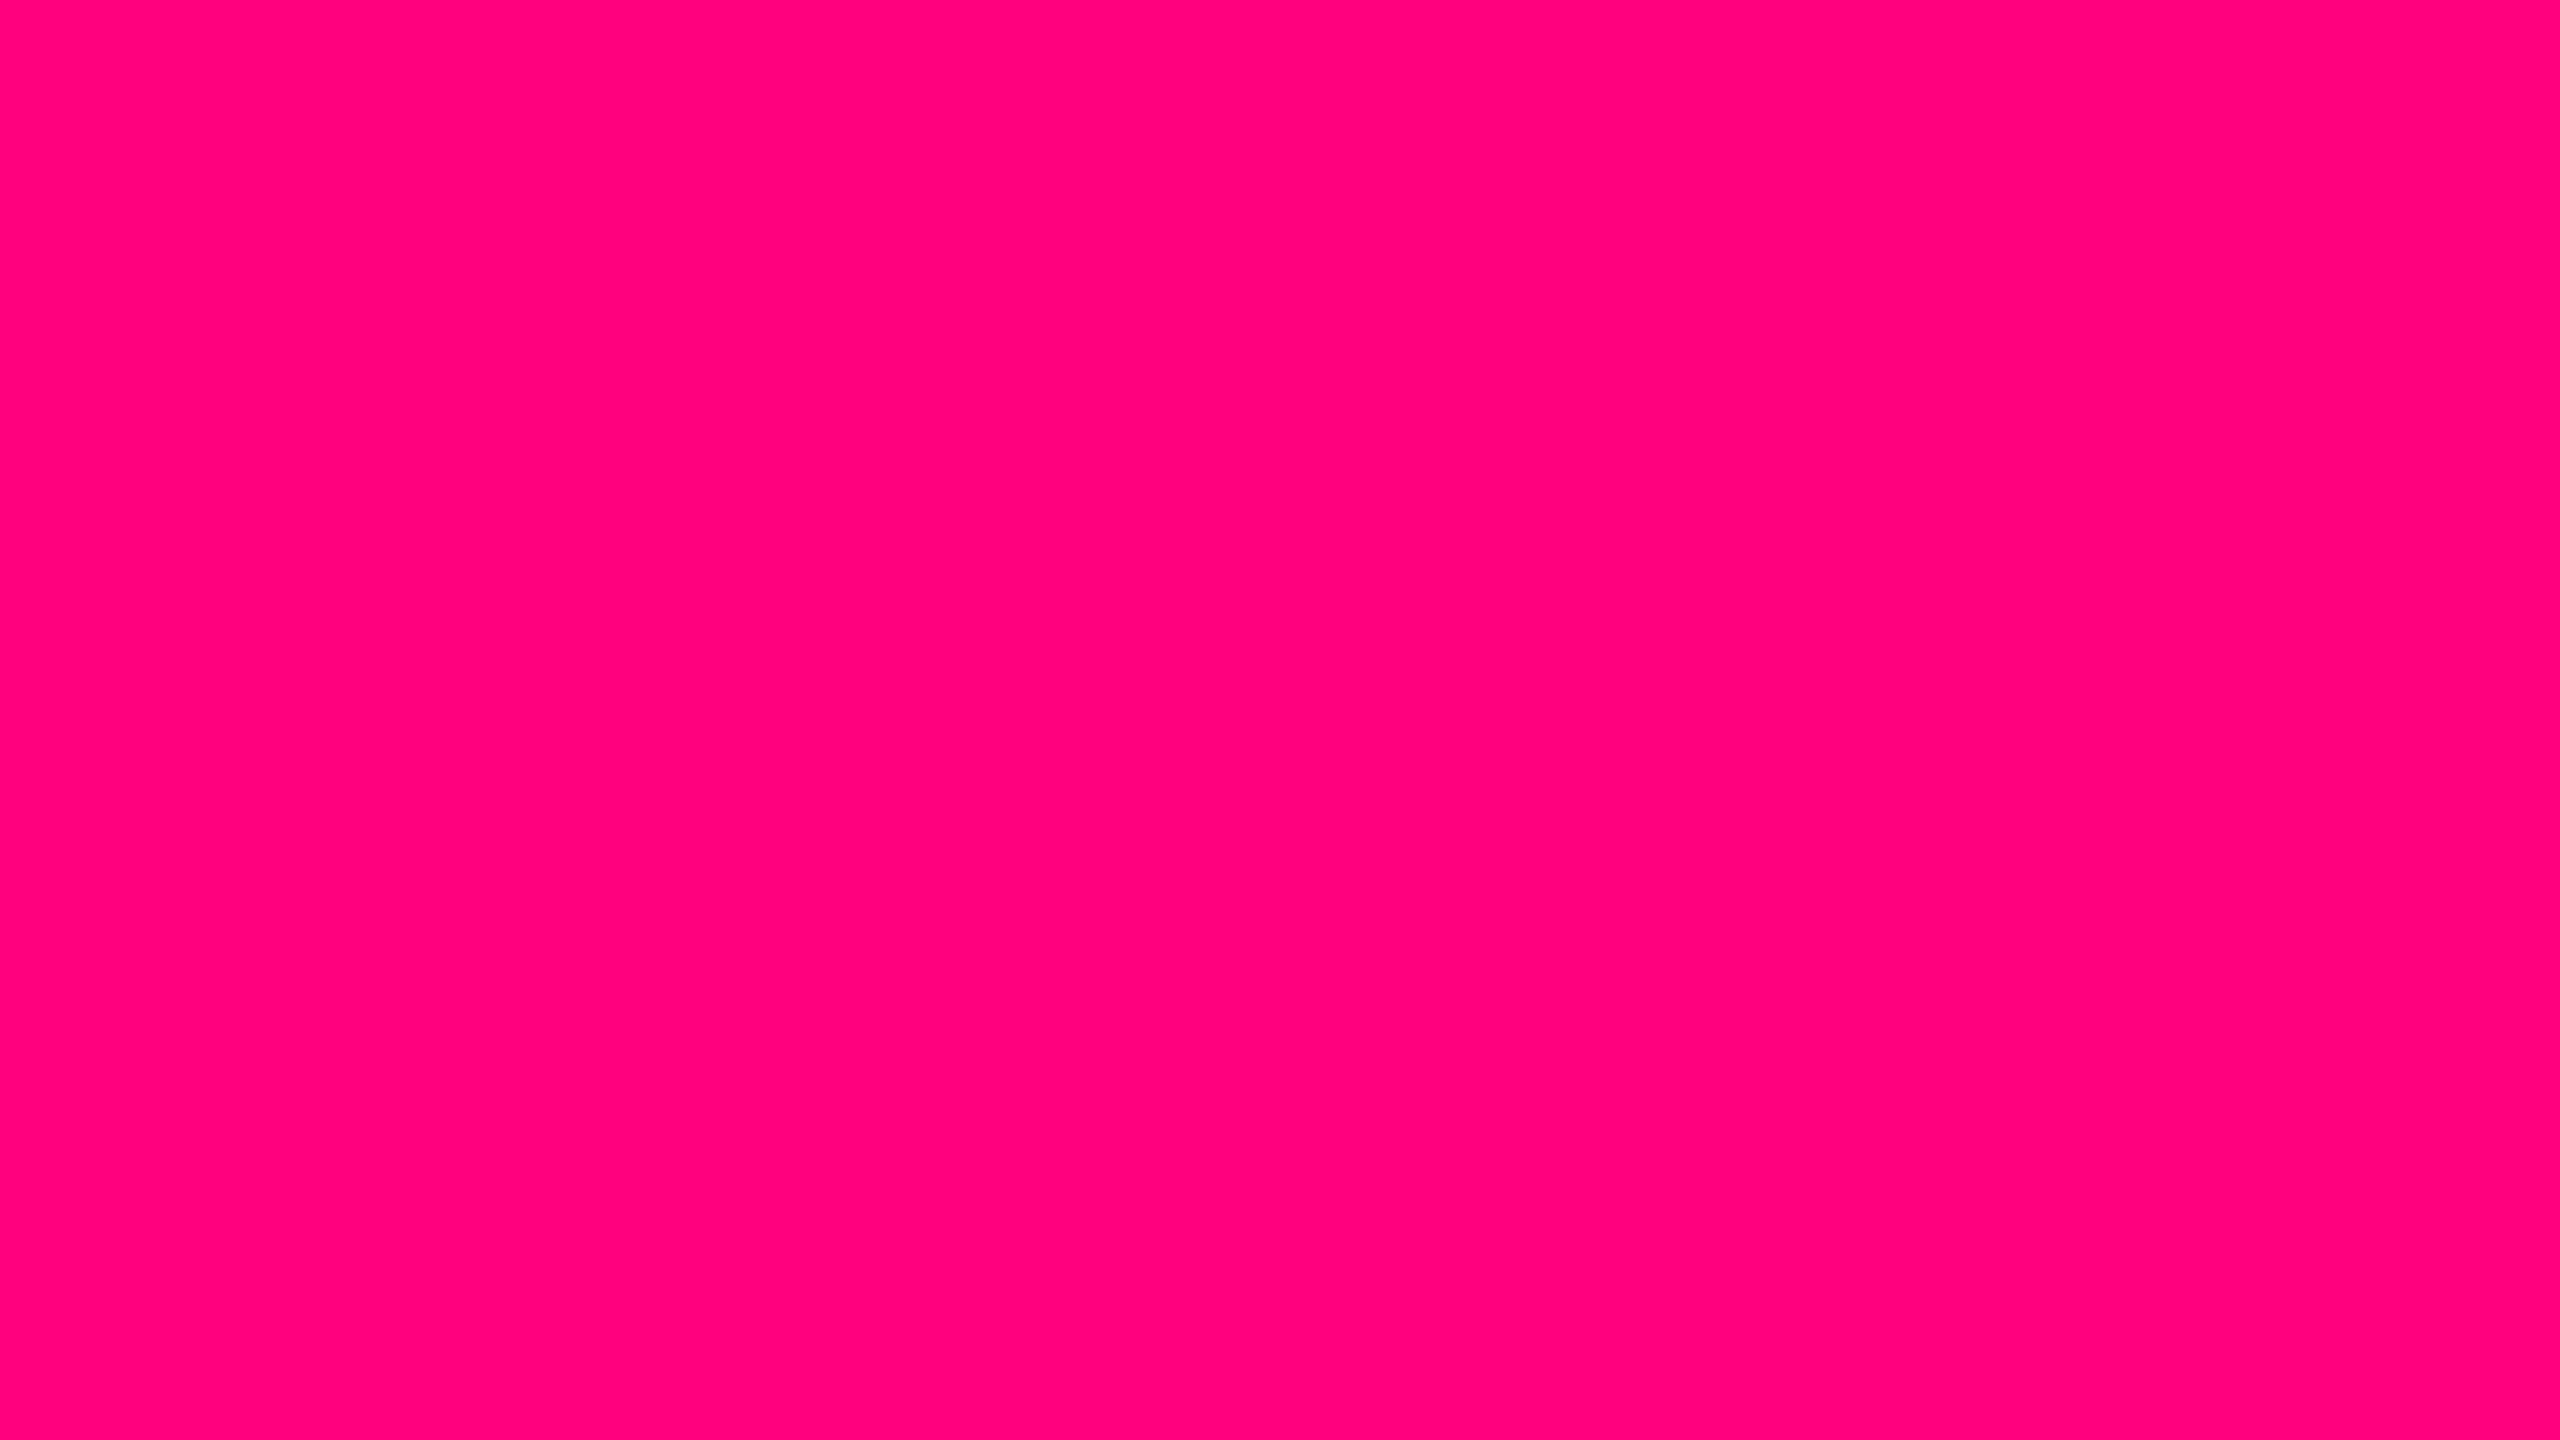 2560x1440-bright-pink-solid-color-background - The Young Americans